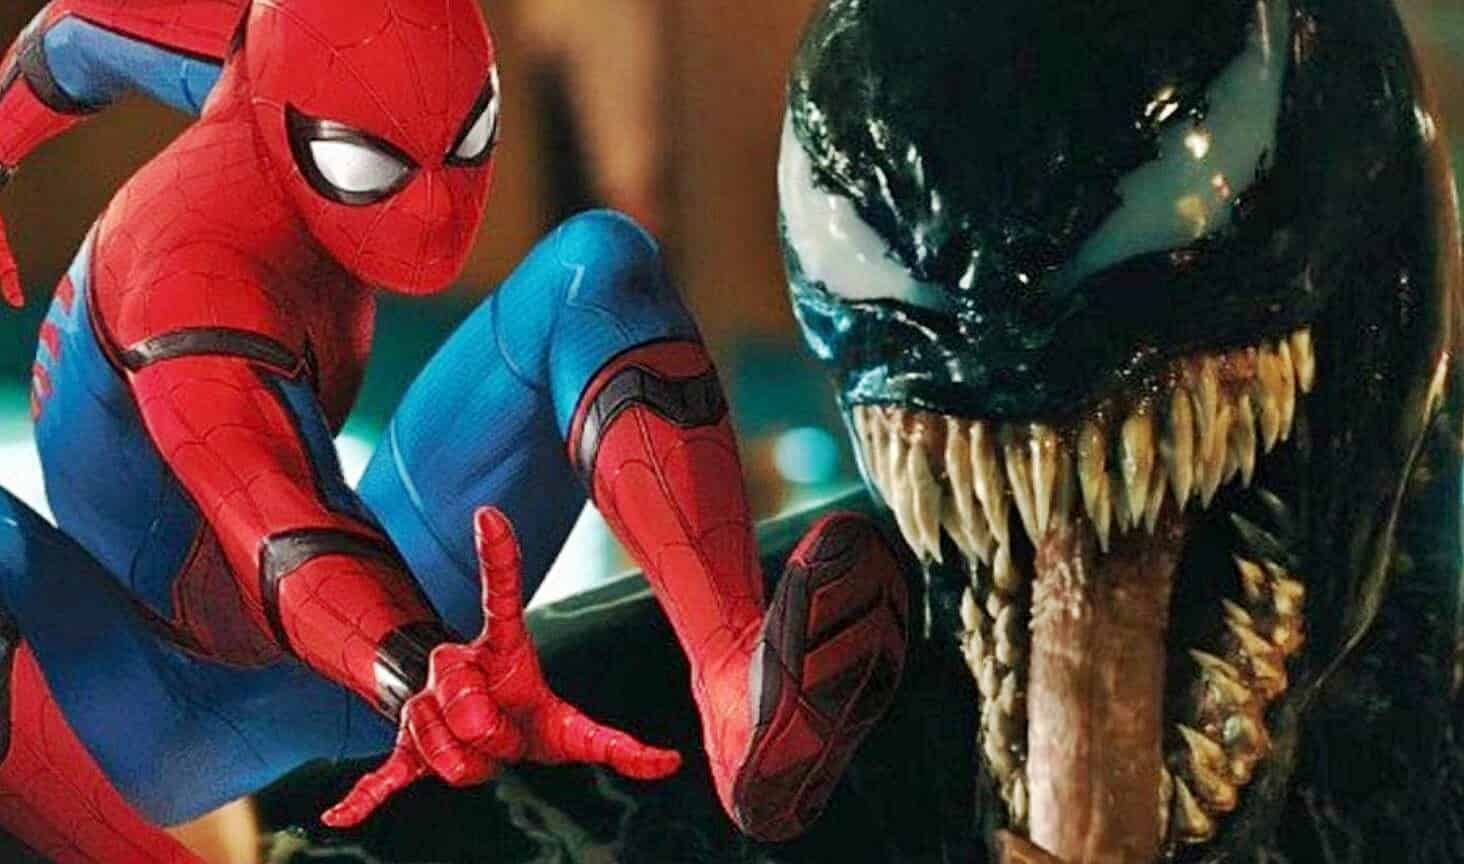 It Looks Like Deadpool Won't Be In Next Spider-Man Movie - But Venom Could Be